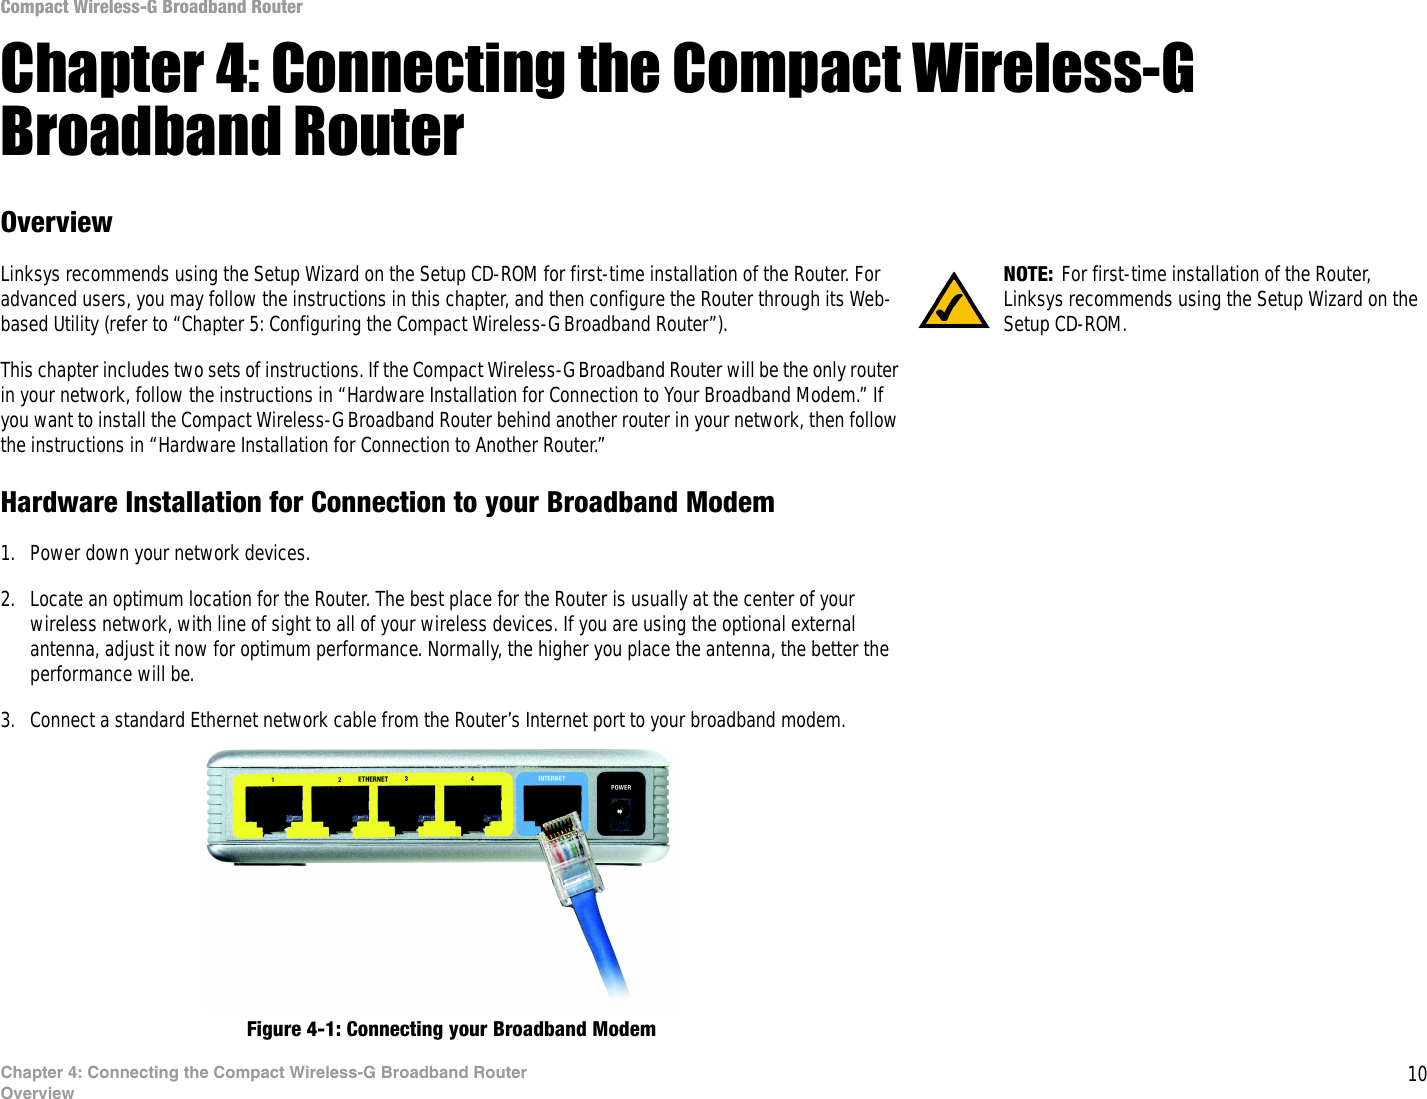 10Chapter 4: Connecting the Compact Wireless-G Broadband RouterOverviewCompact Wireless-G Broadband RouterChapter 4: Connecting the Compact Wireless-G Broadband RouterOverviewLinksys recommends using the Setup Wizard on the Setup CD-ROM for first-time installation of the Router. For advanced users, you may follow the instructions in this chapter, and then configure the Router through its Web-based Utility (refer to “Chapter 5: Configuring the Compact Wireless-G Broadband Router”).This chapter includes two sets of instructions. If the Compact Wireless-G Broadband Router will be the only router in your network, follow the instructions in “Hardware Installation for Connection to Your Broadband Modem.” If you want to install the Compact Wireless-G Broadband Router behind another router in your network, then follow the instructions in “Hardware Installation for Connection to Another Router.”Hardware Installation for Connection to your Broadband Modem1. Power down your network devices.2. Locate an optimum location for the Router. The best place for the Router is usually at the center of your wireless network, with line of sight to all of your wireless devices. If you are using the optional external antenna, adjust it now for optimum performance. Normally, the higher you place the antenna, the better the performance will be.3. Connect a standard Ethernet network cable from the Router’s Internet port to your broadband modem.Figure 4-1: Connecting your Broadband ModemNOTE: For first-time installation of the Router, Linksys recommends using the Setup Wizard on the Setup CD-ROM.